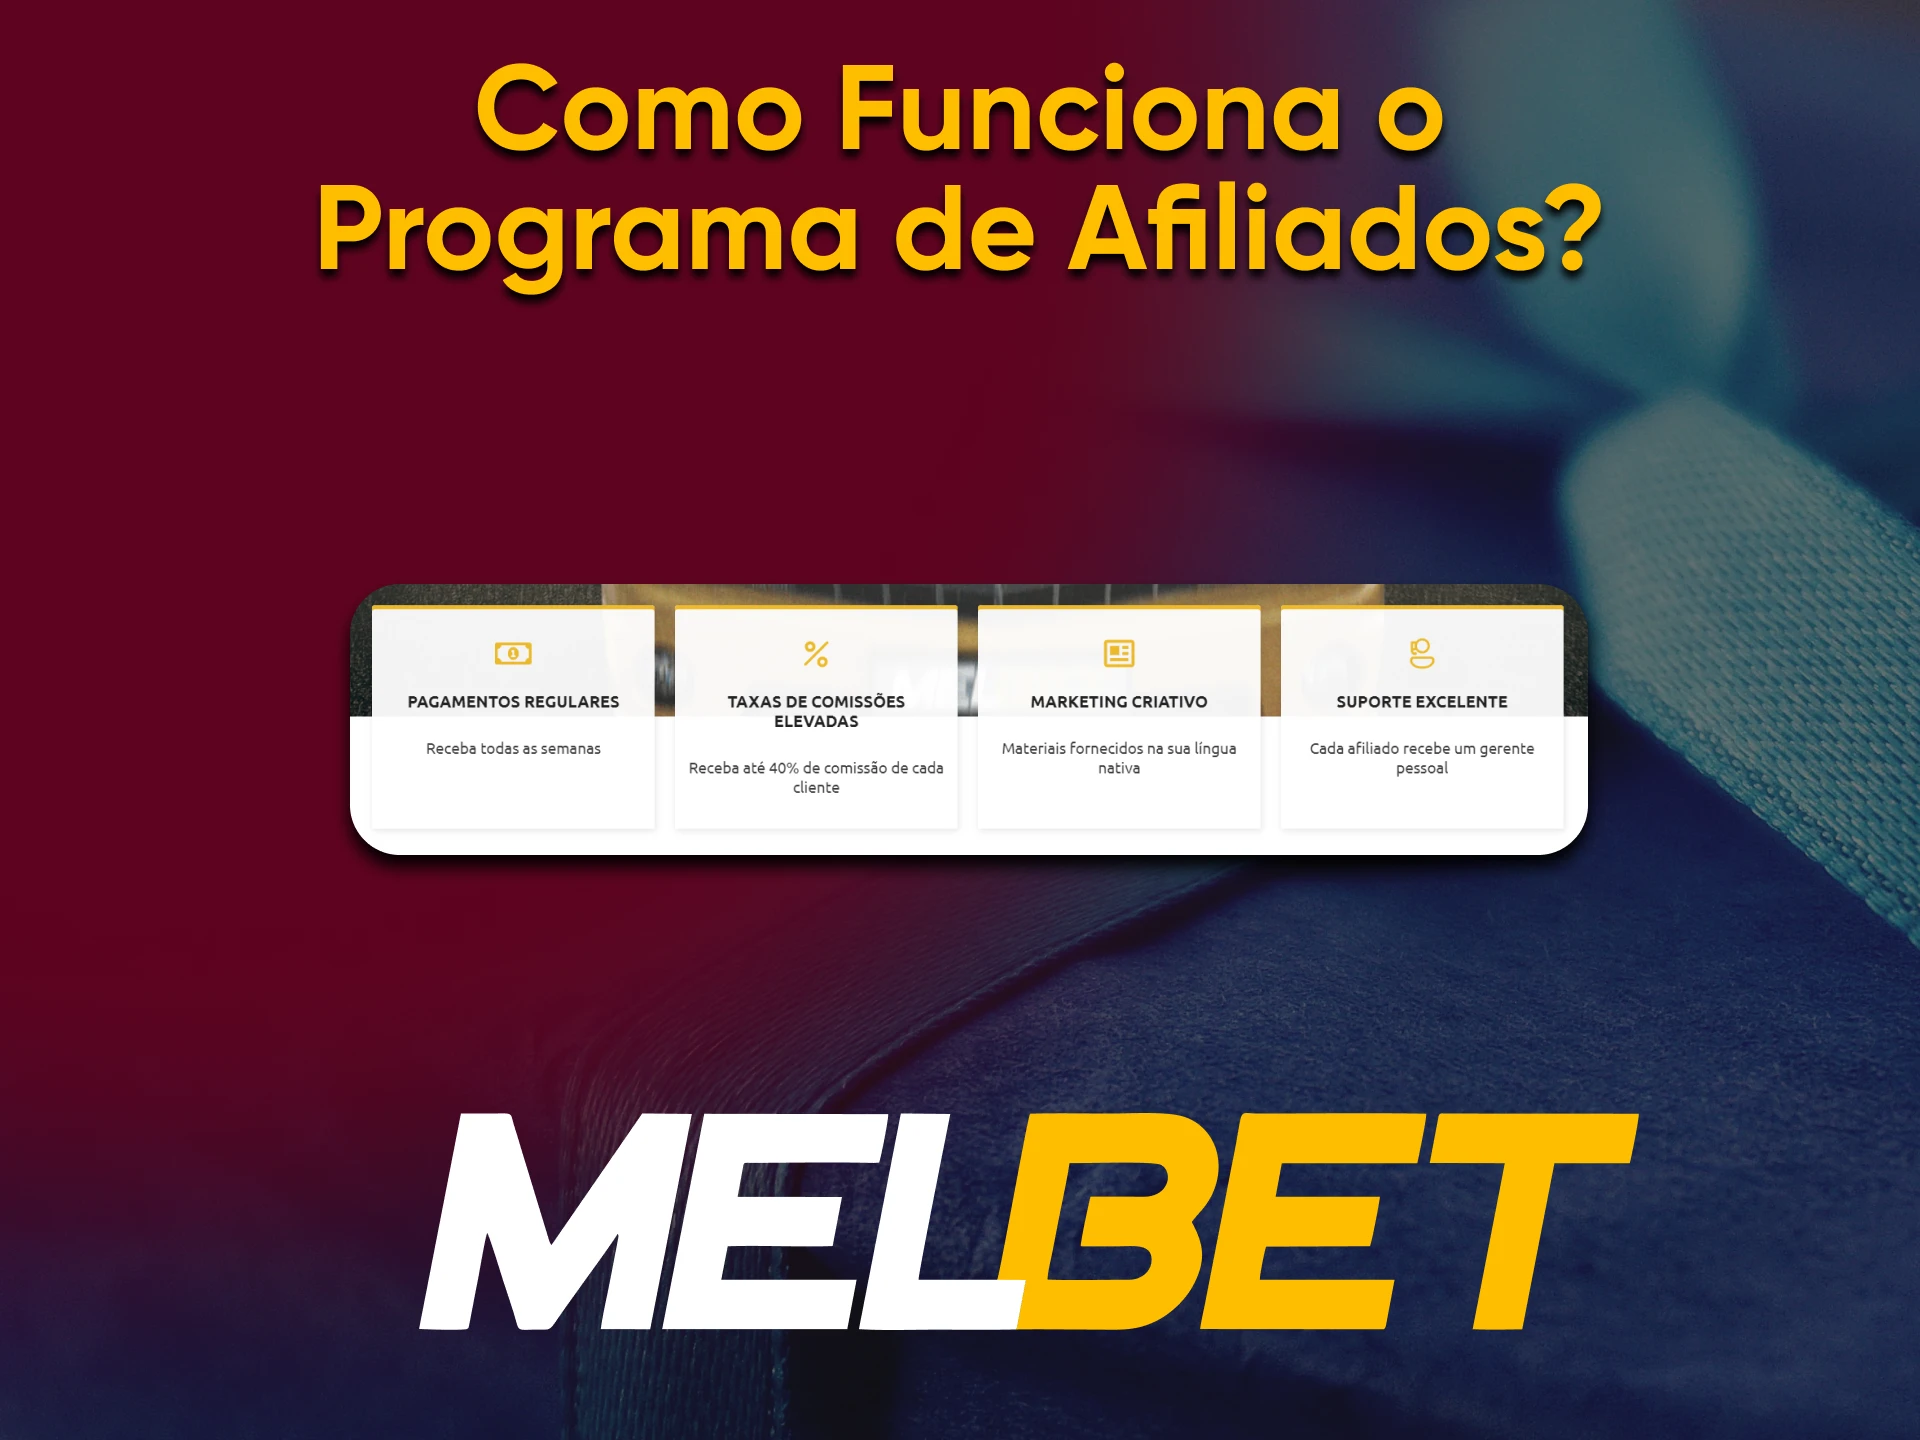 How does the Melbet Affiliate Program work?